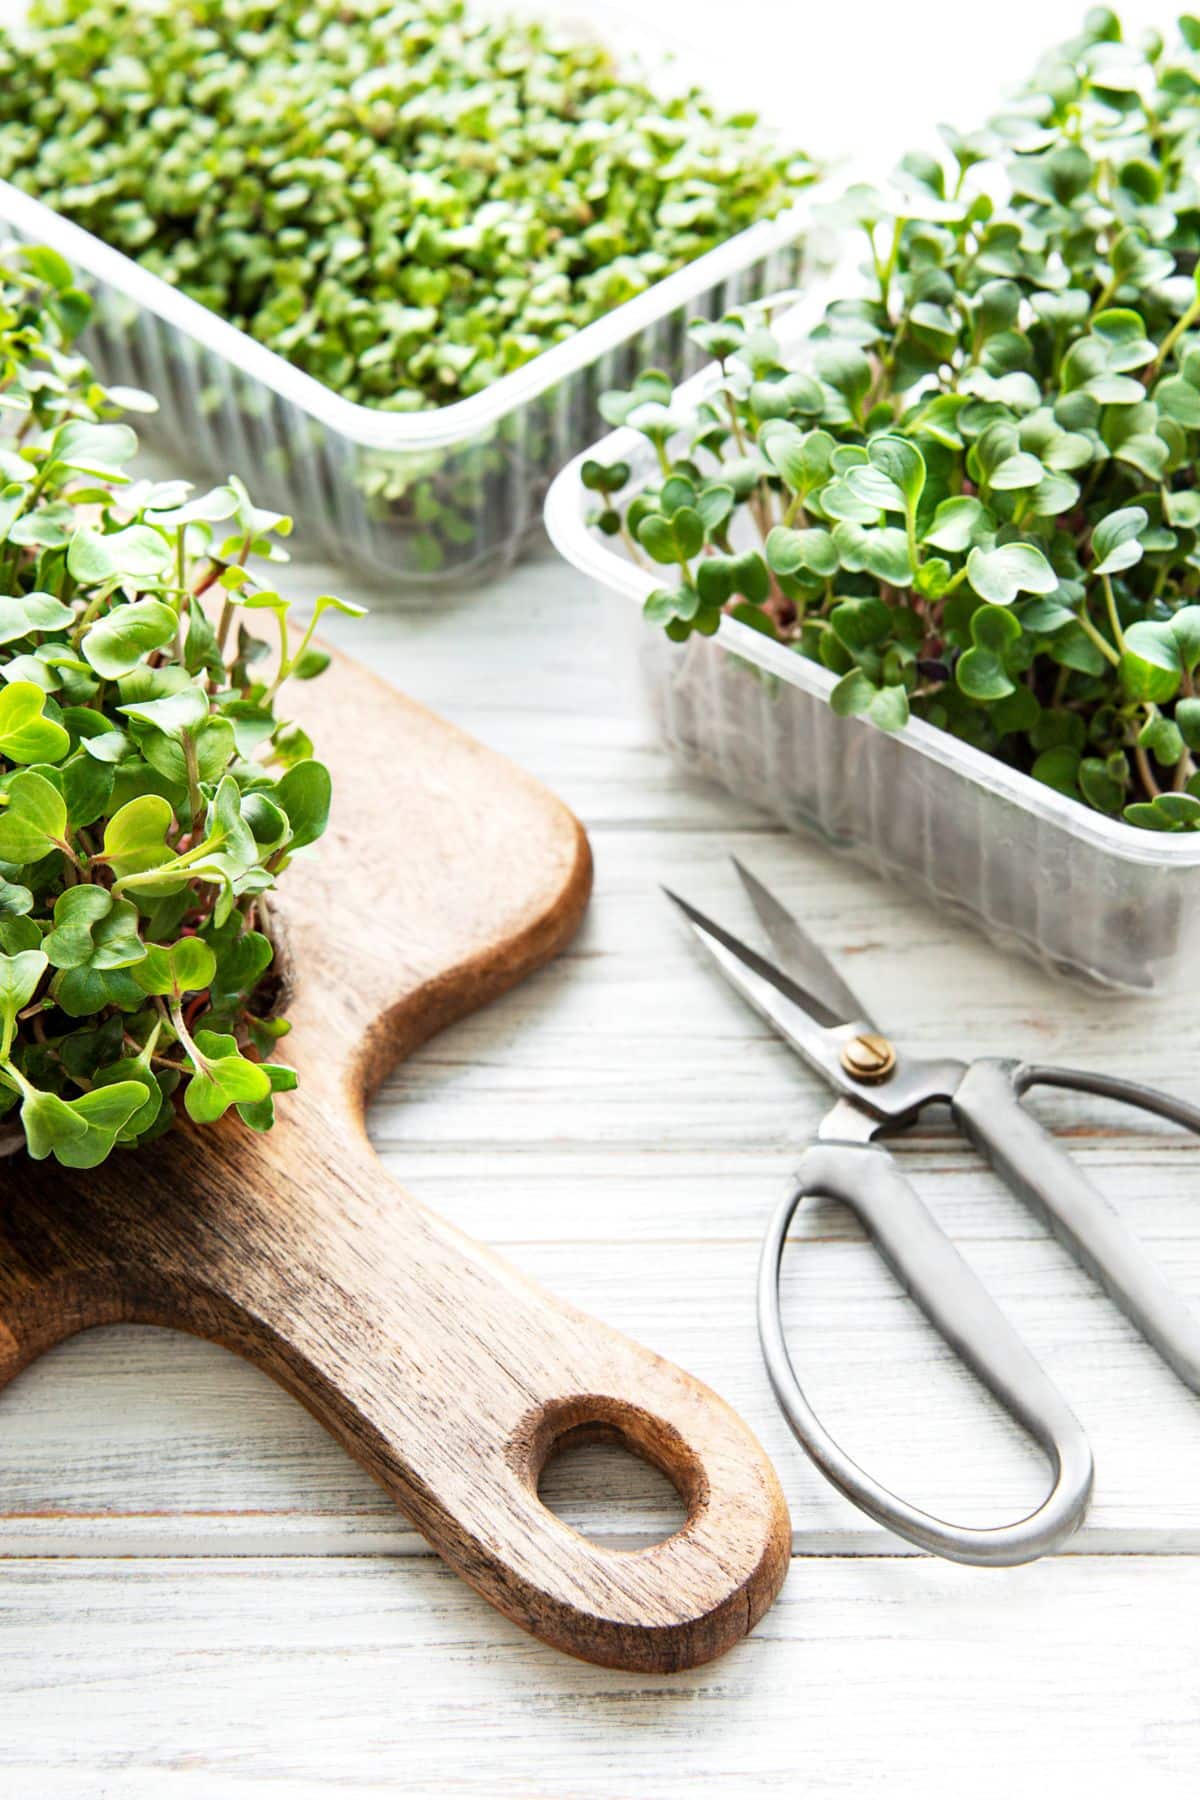 microgreens on a cutting board and in a growing container beside a pair of sheers.